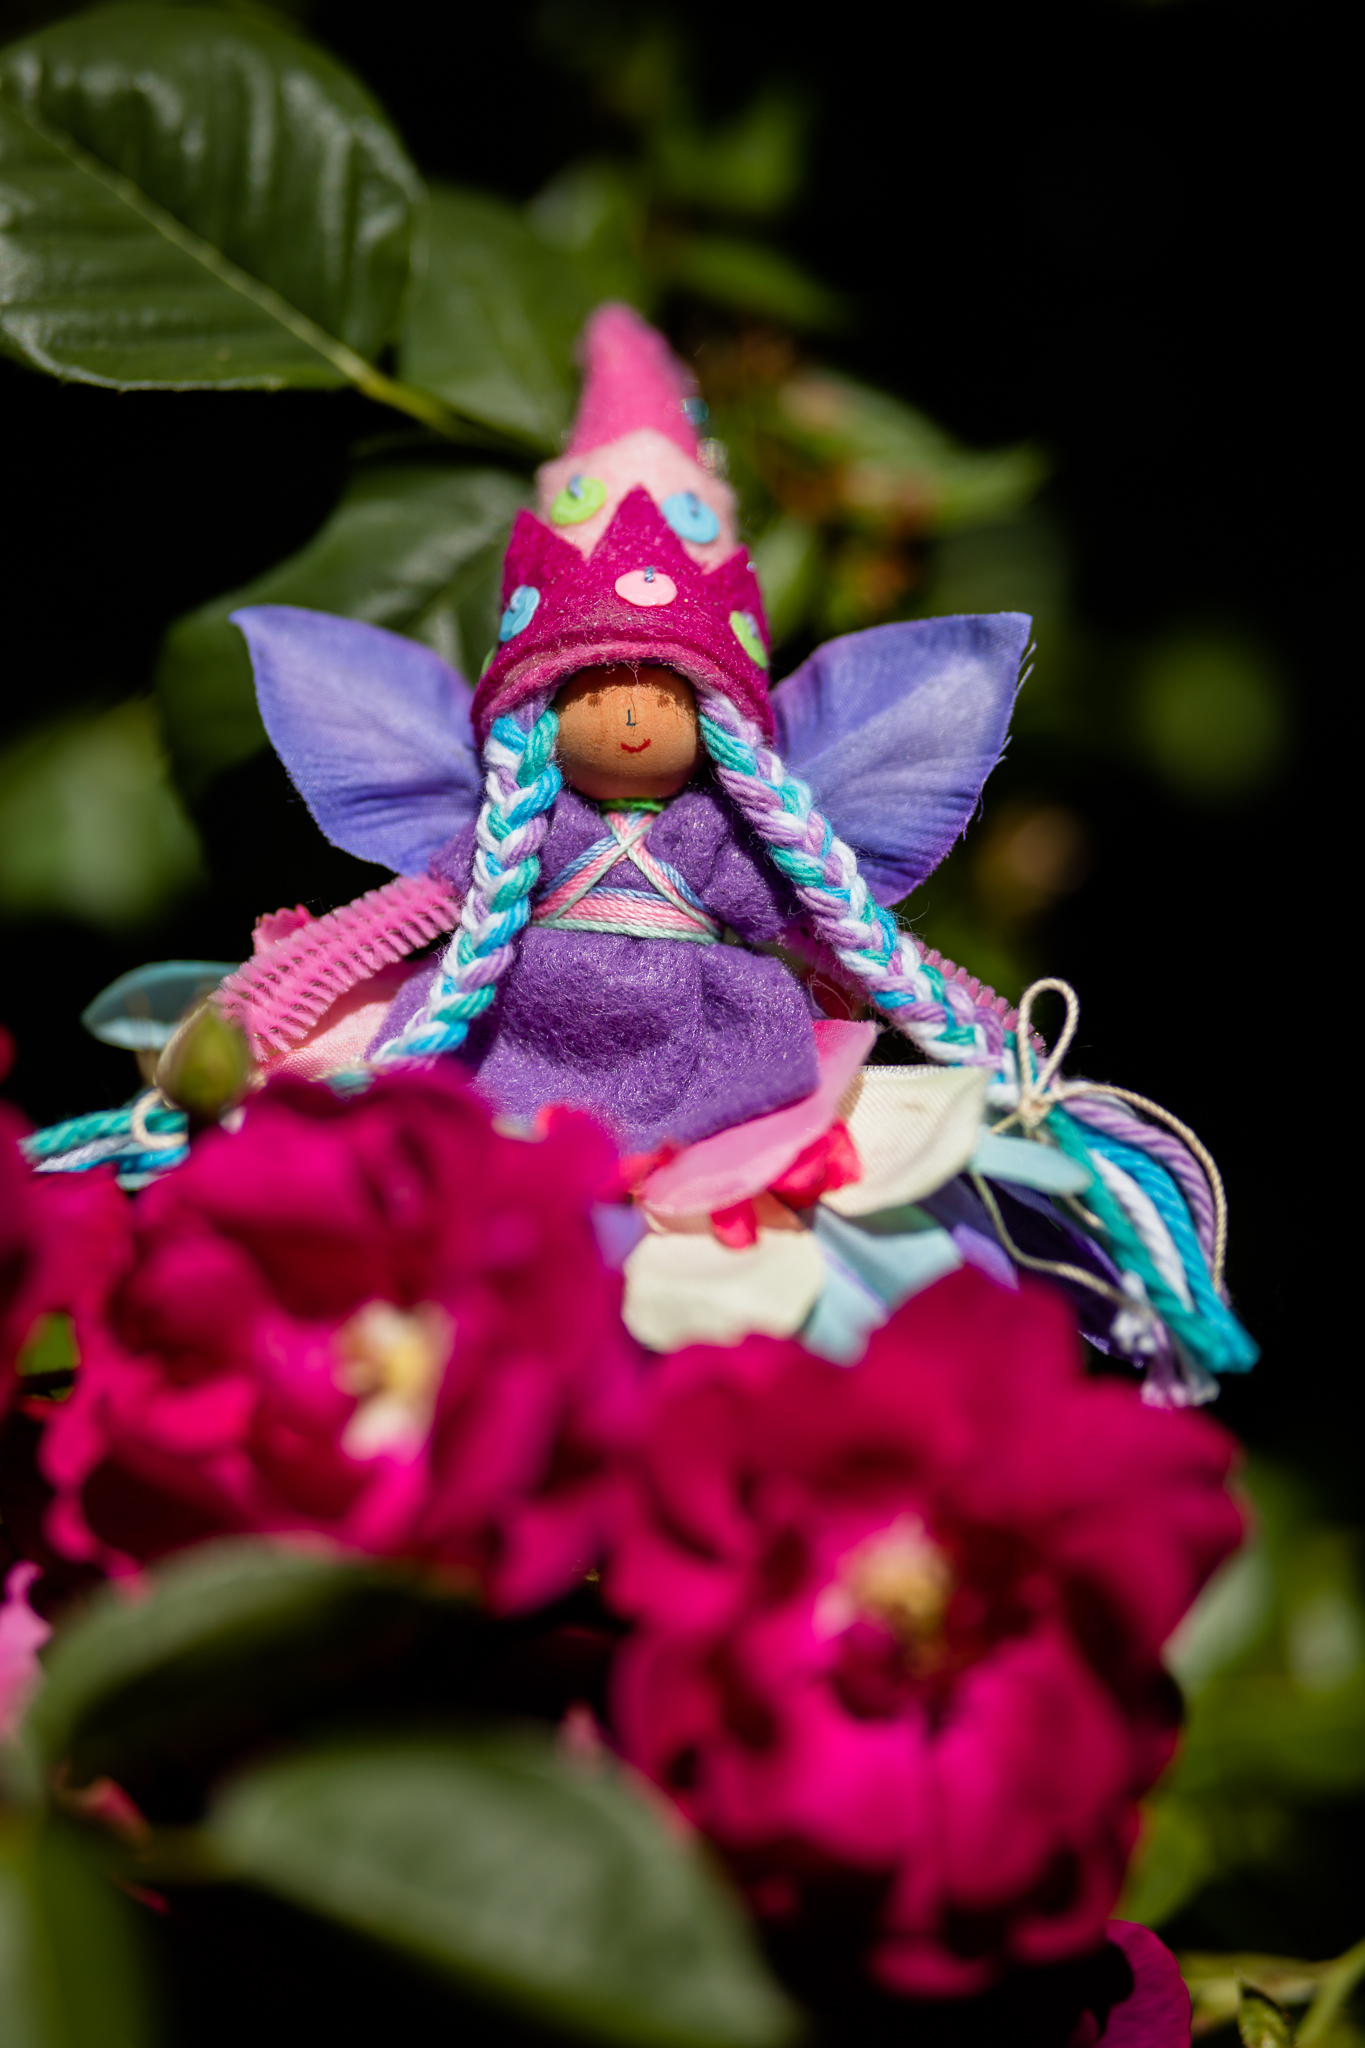 Summer Fairy Doll made with Magical Forest Fairy Crafts through the Seasons book by Lenka Vodicka-Paredes and Asia Currie | Charming and playful crafts for children